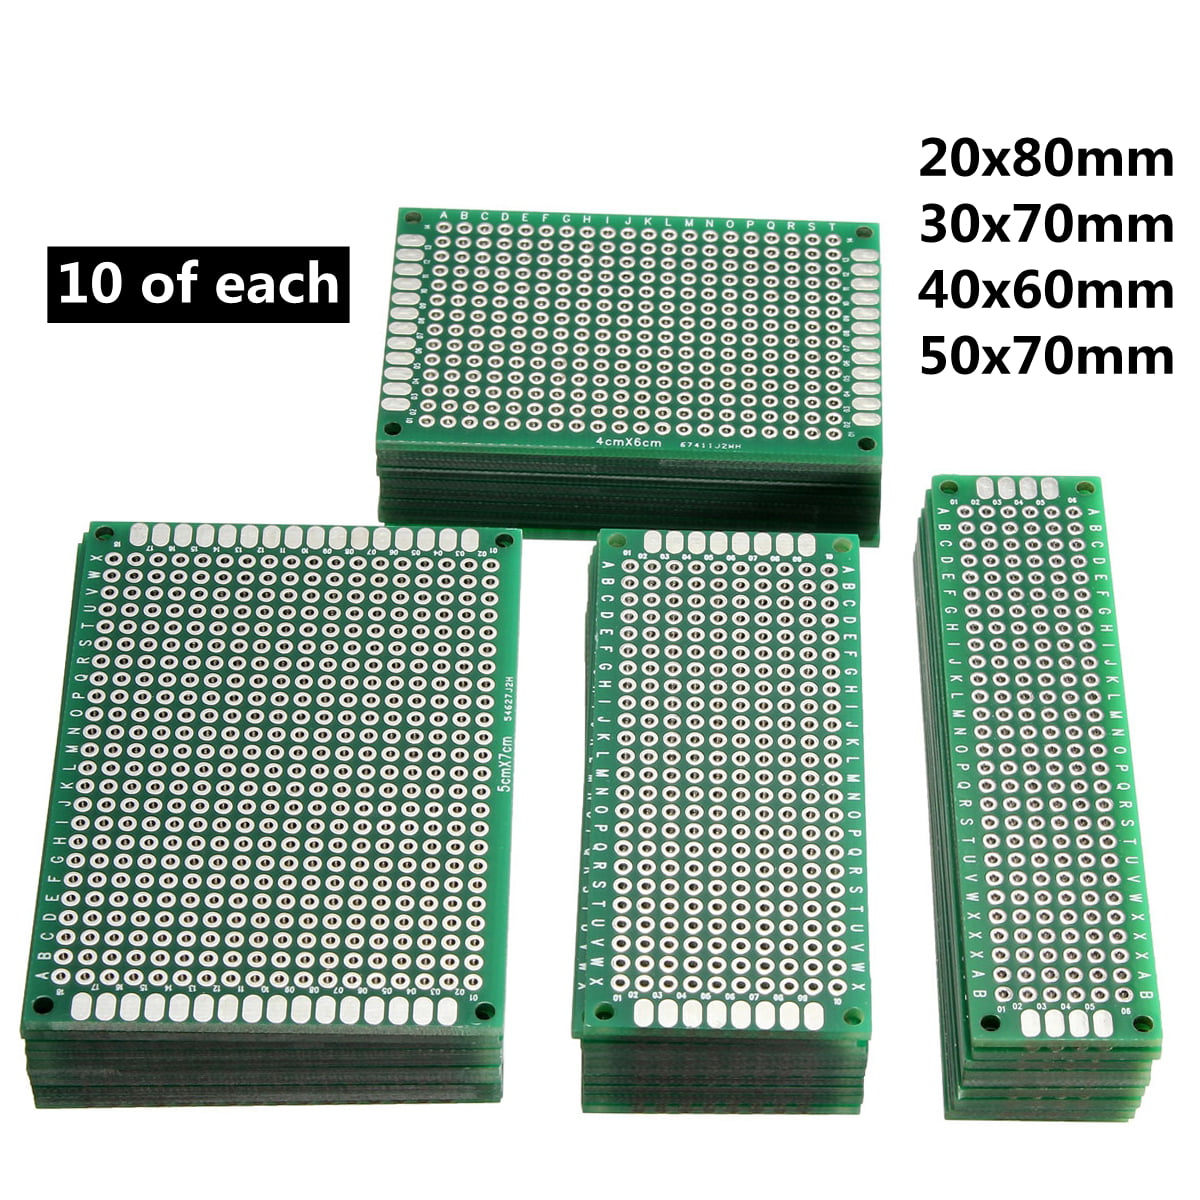 5pcs Prototype PCB Double Side Bread board Tinned Universal 40x60 mm FR4 New